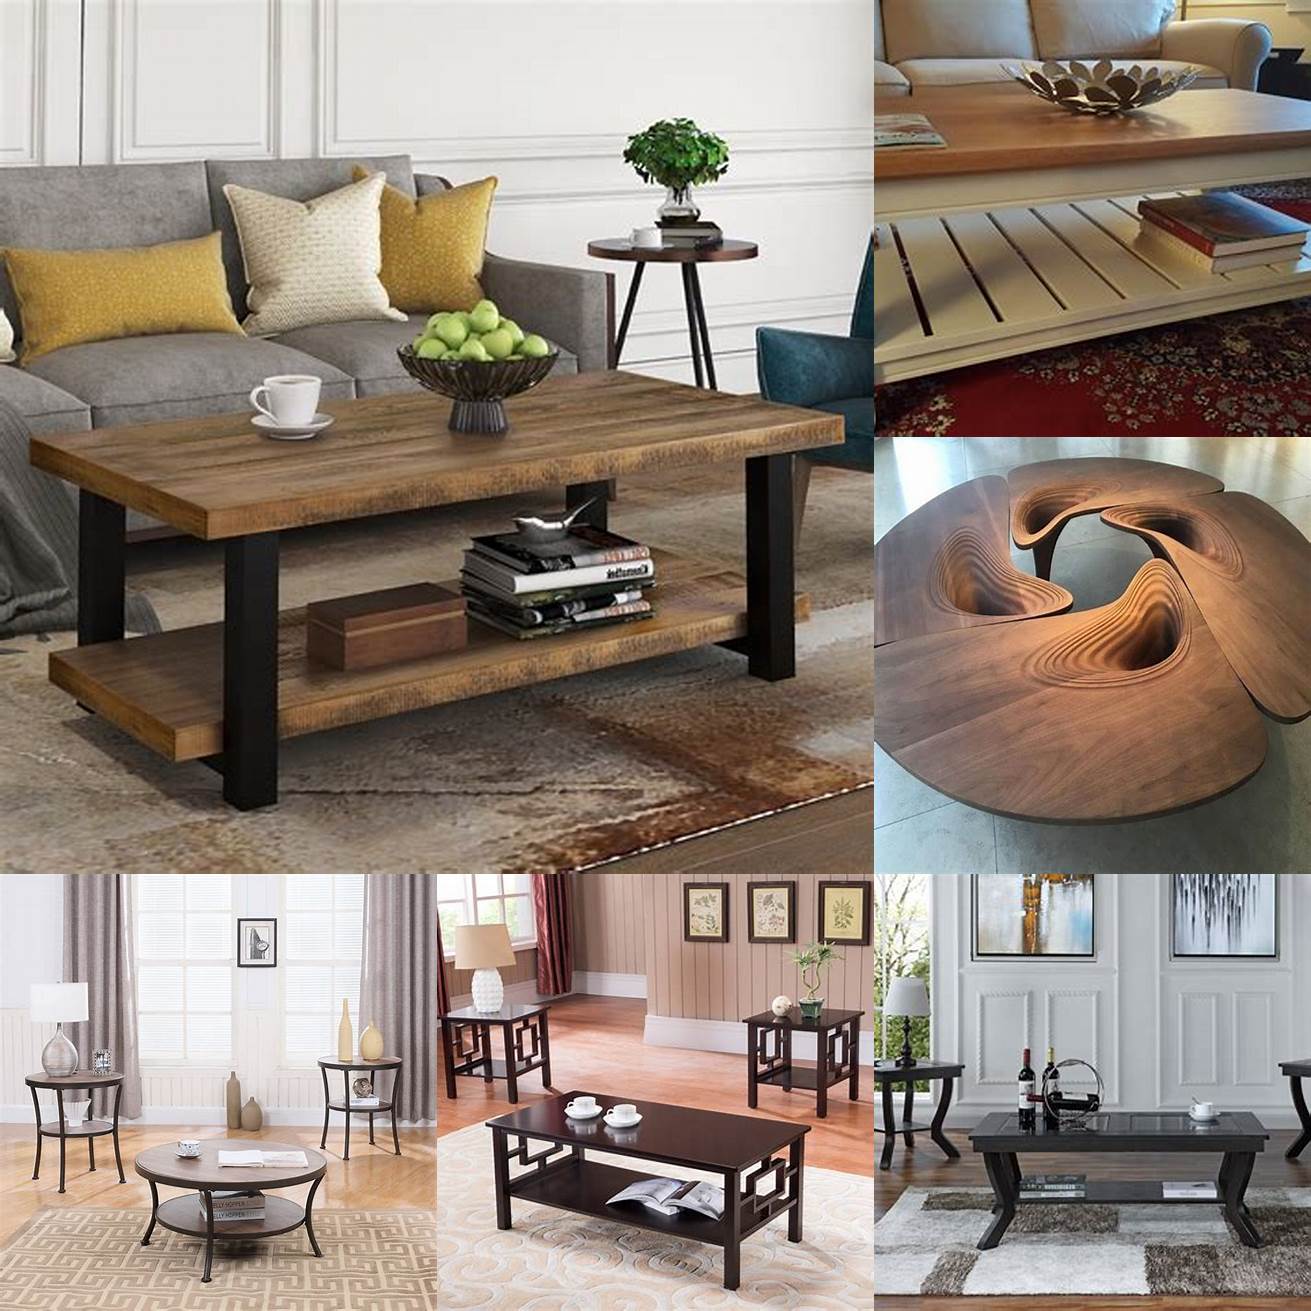 A custom coffee table can be a statement piece for your living room providing both style and function